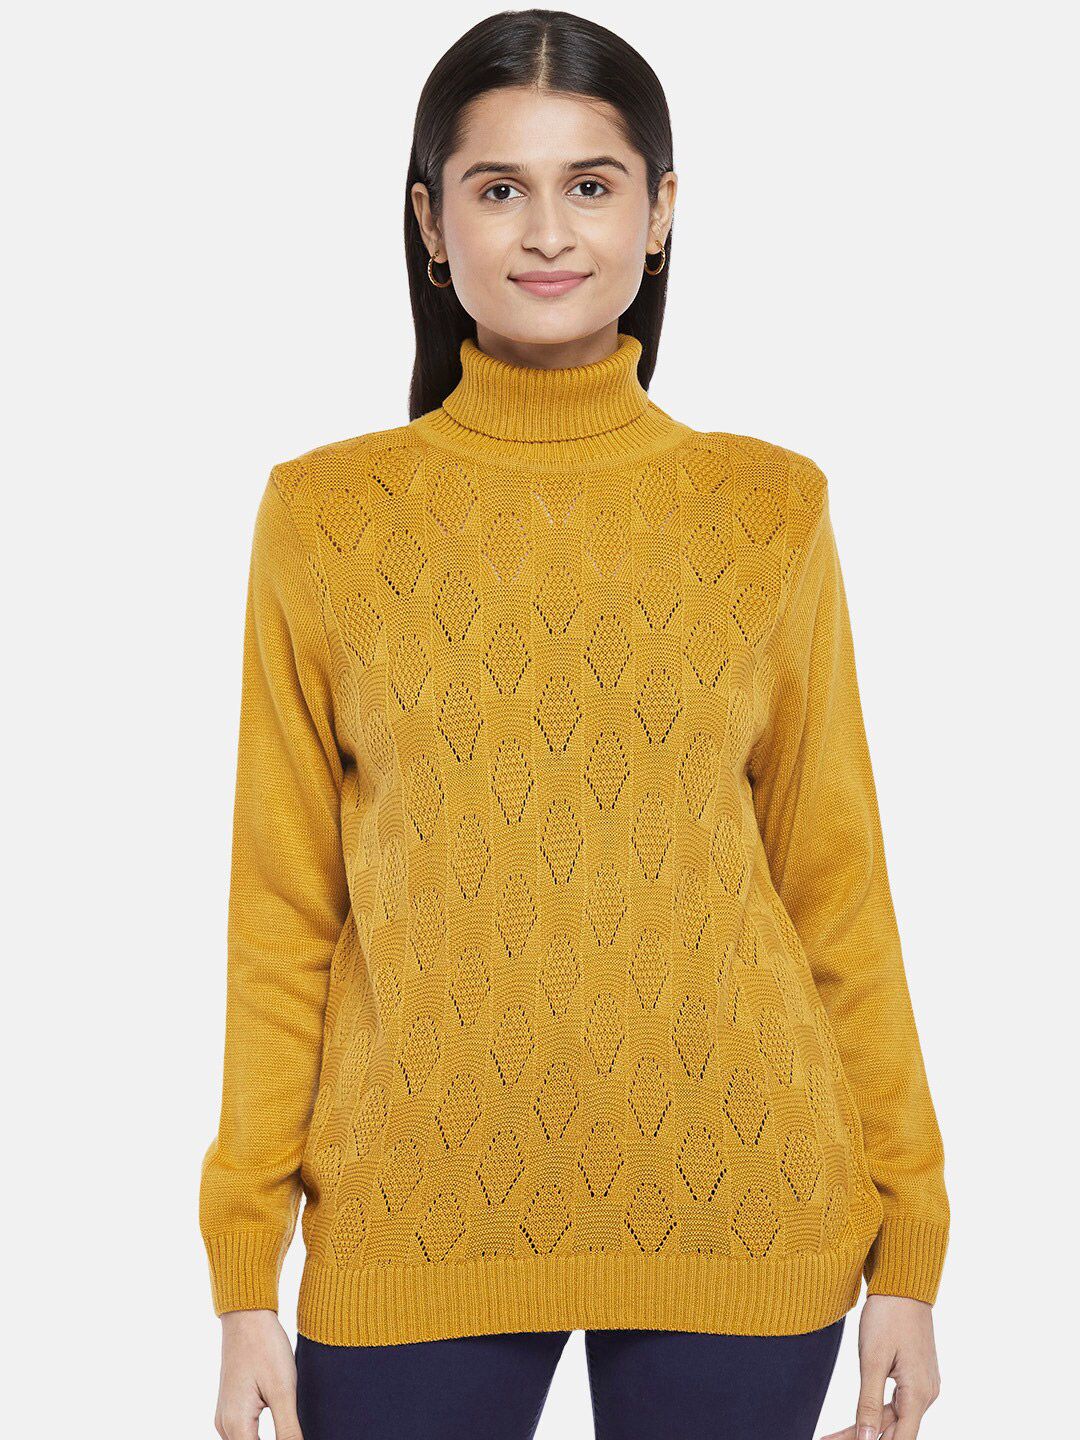 Honey by Pantaloons Women Mustard Self Designed Acrylic Pullover Sweater Price in India